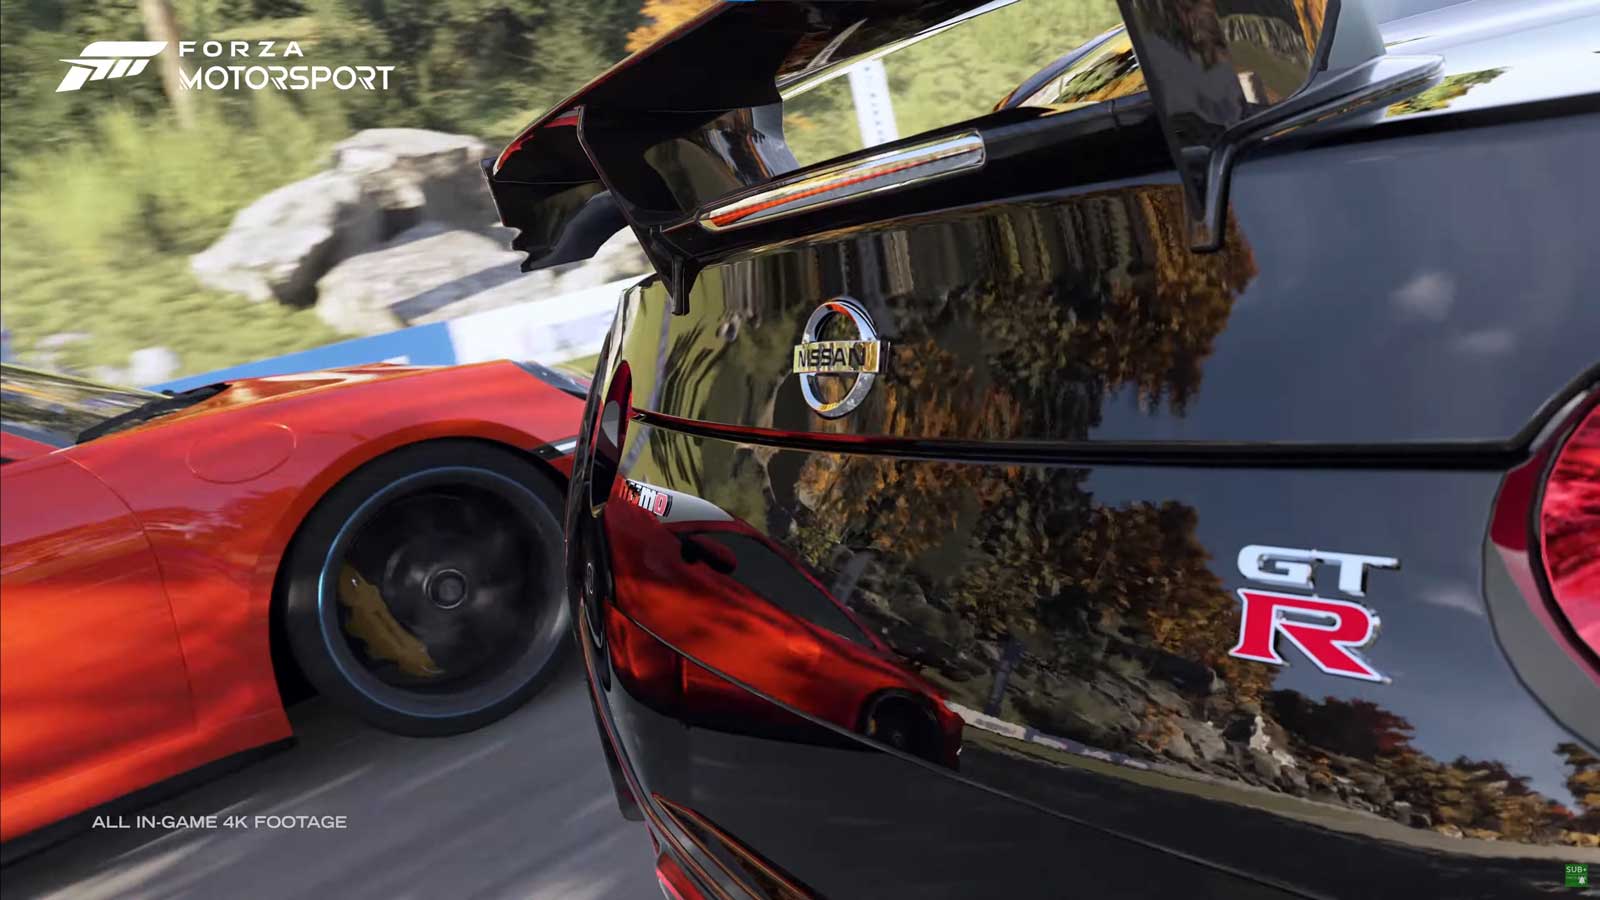 Environmental reflection on metallic surface from the video game Forza Motorsport 7.